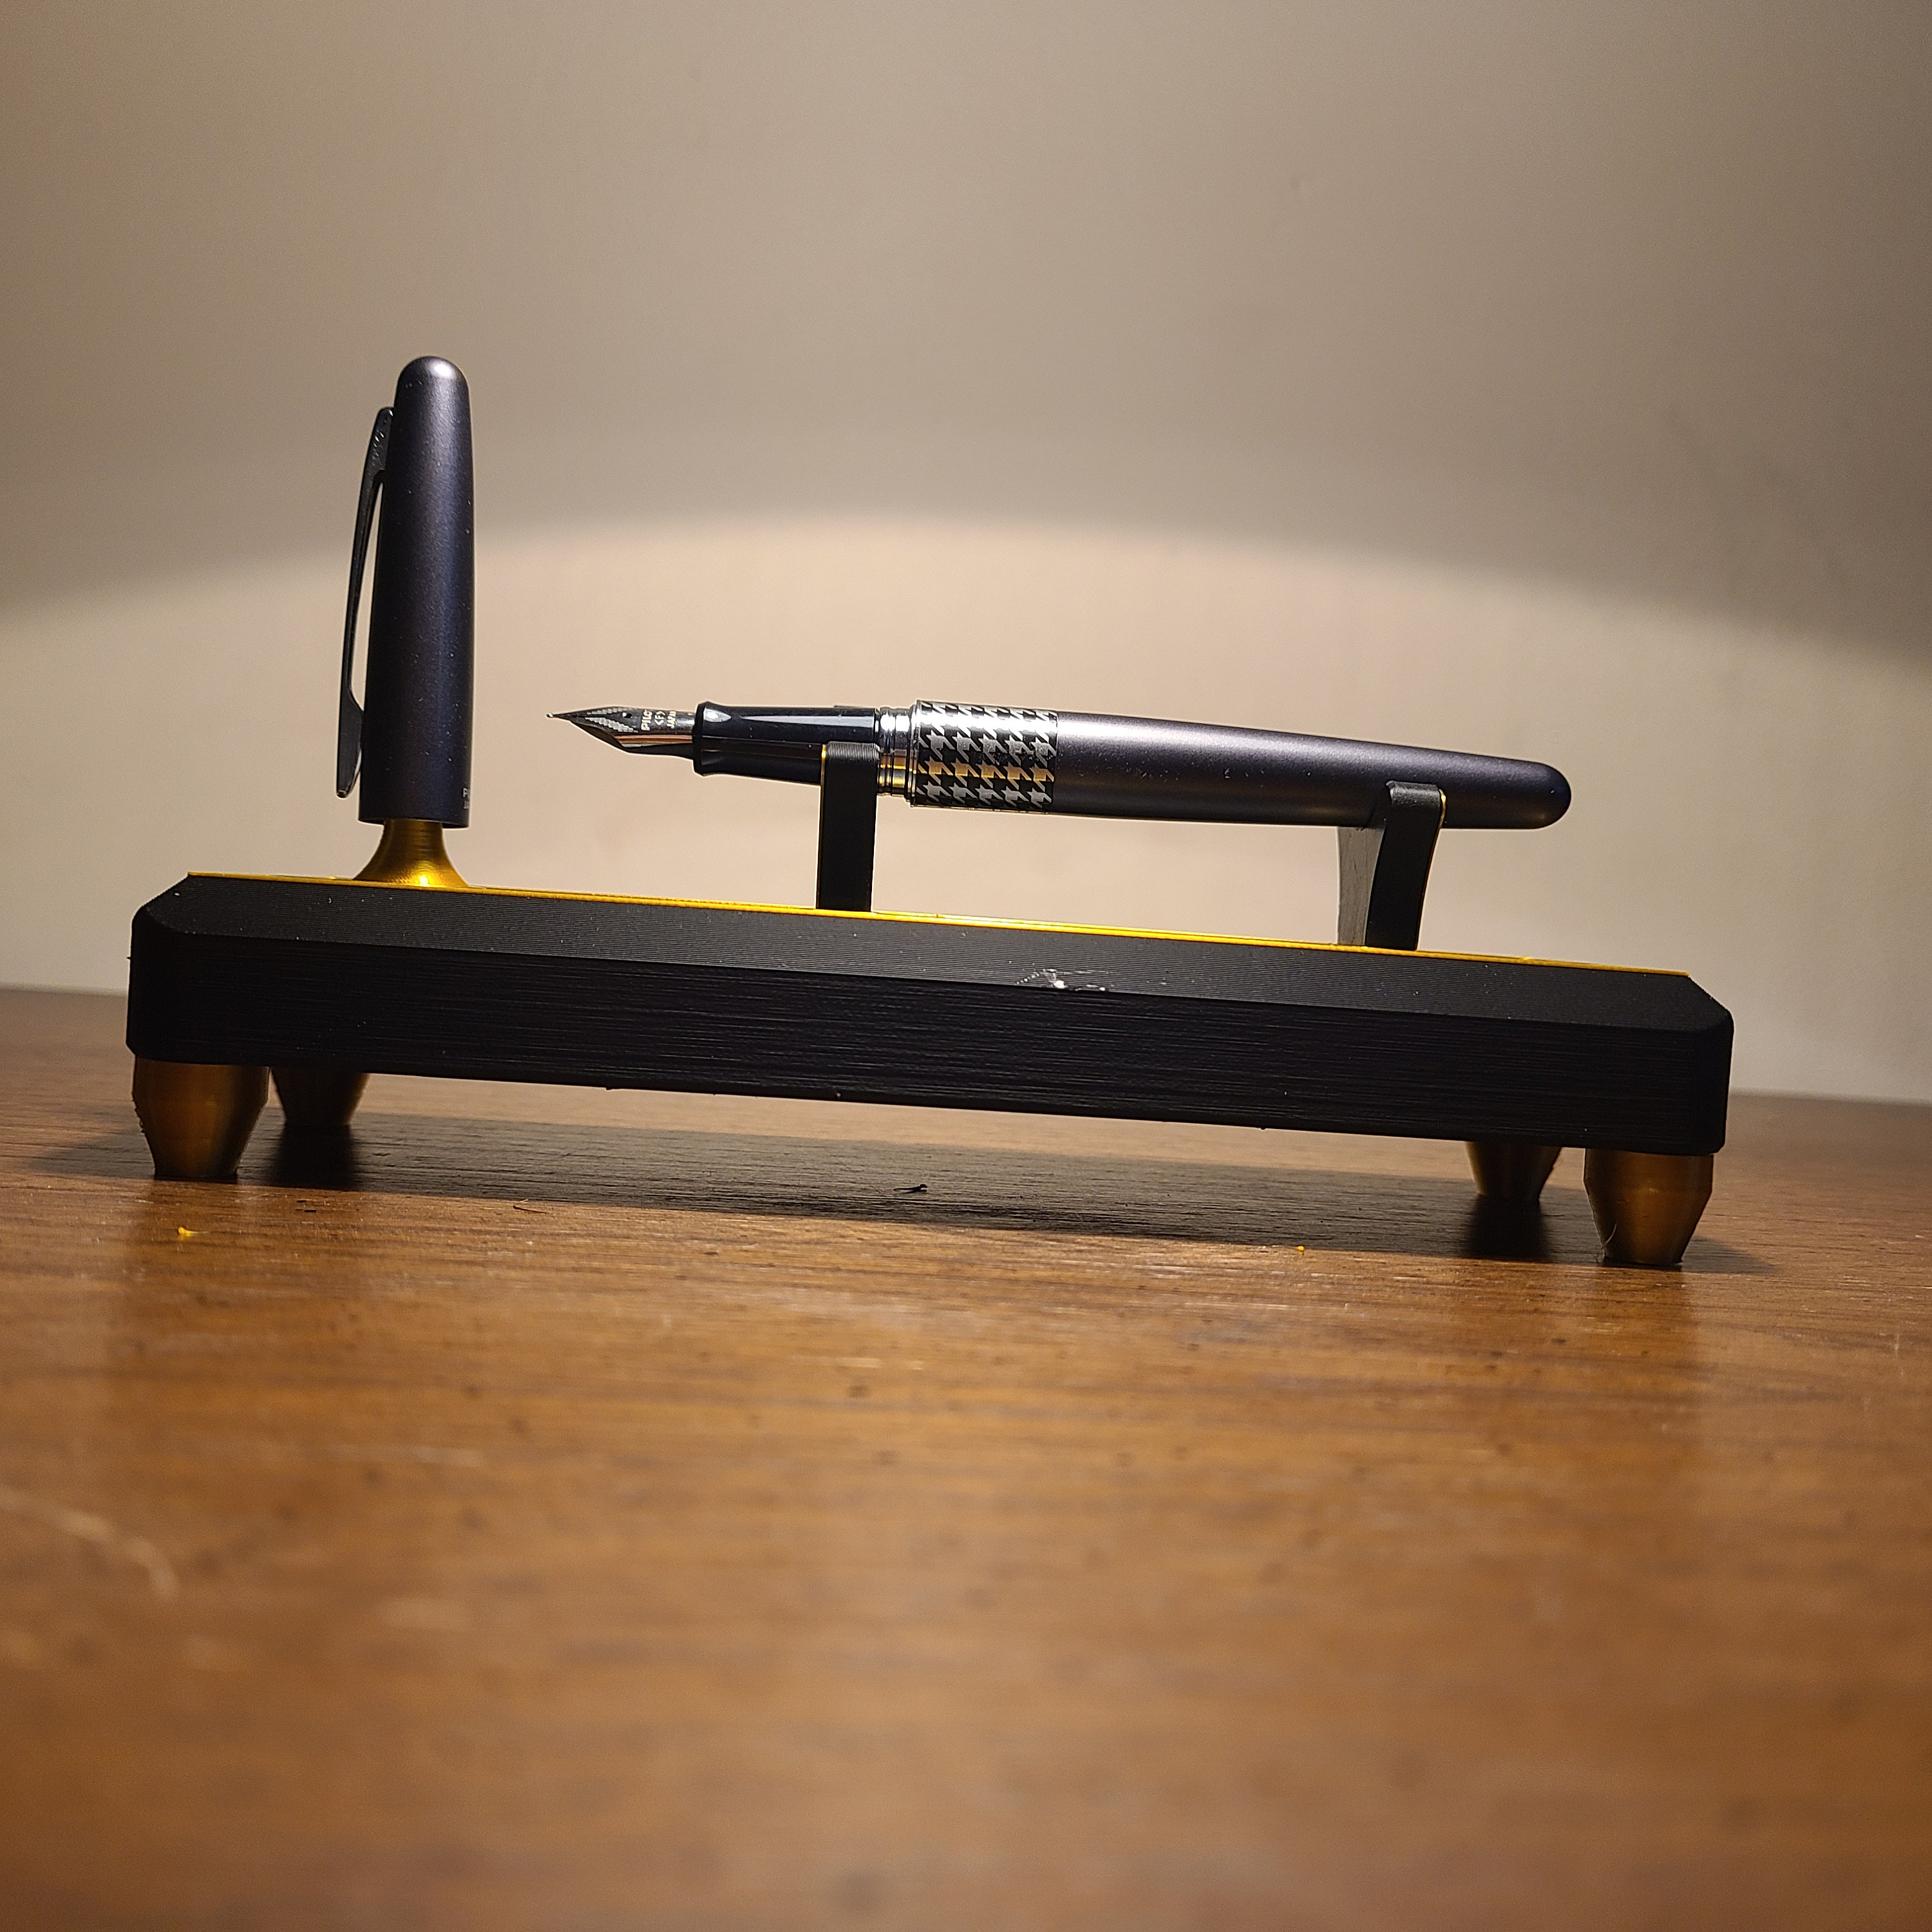 SINGLE PEN Holder With Cap Post Designed for Fountain Pens Grail Pen Holder  and Display Desktop Pen Stand and Holder 